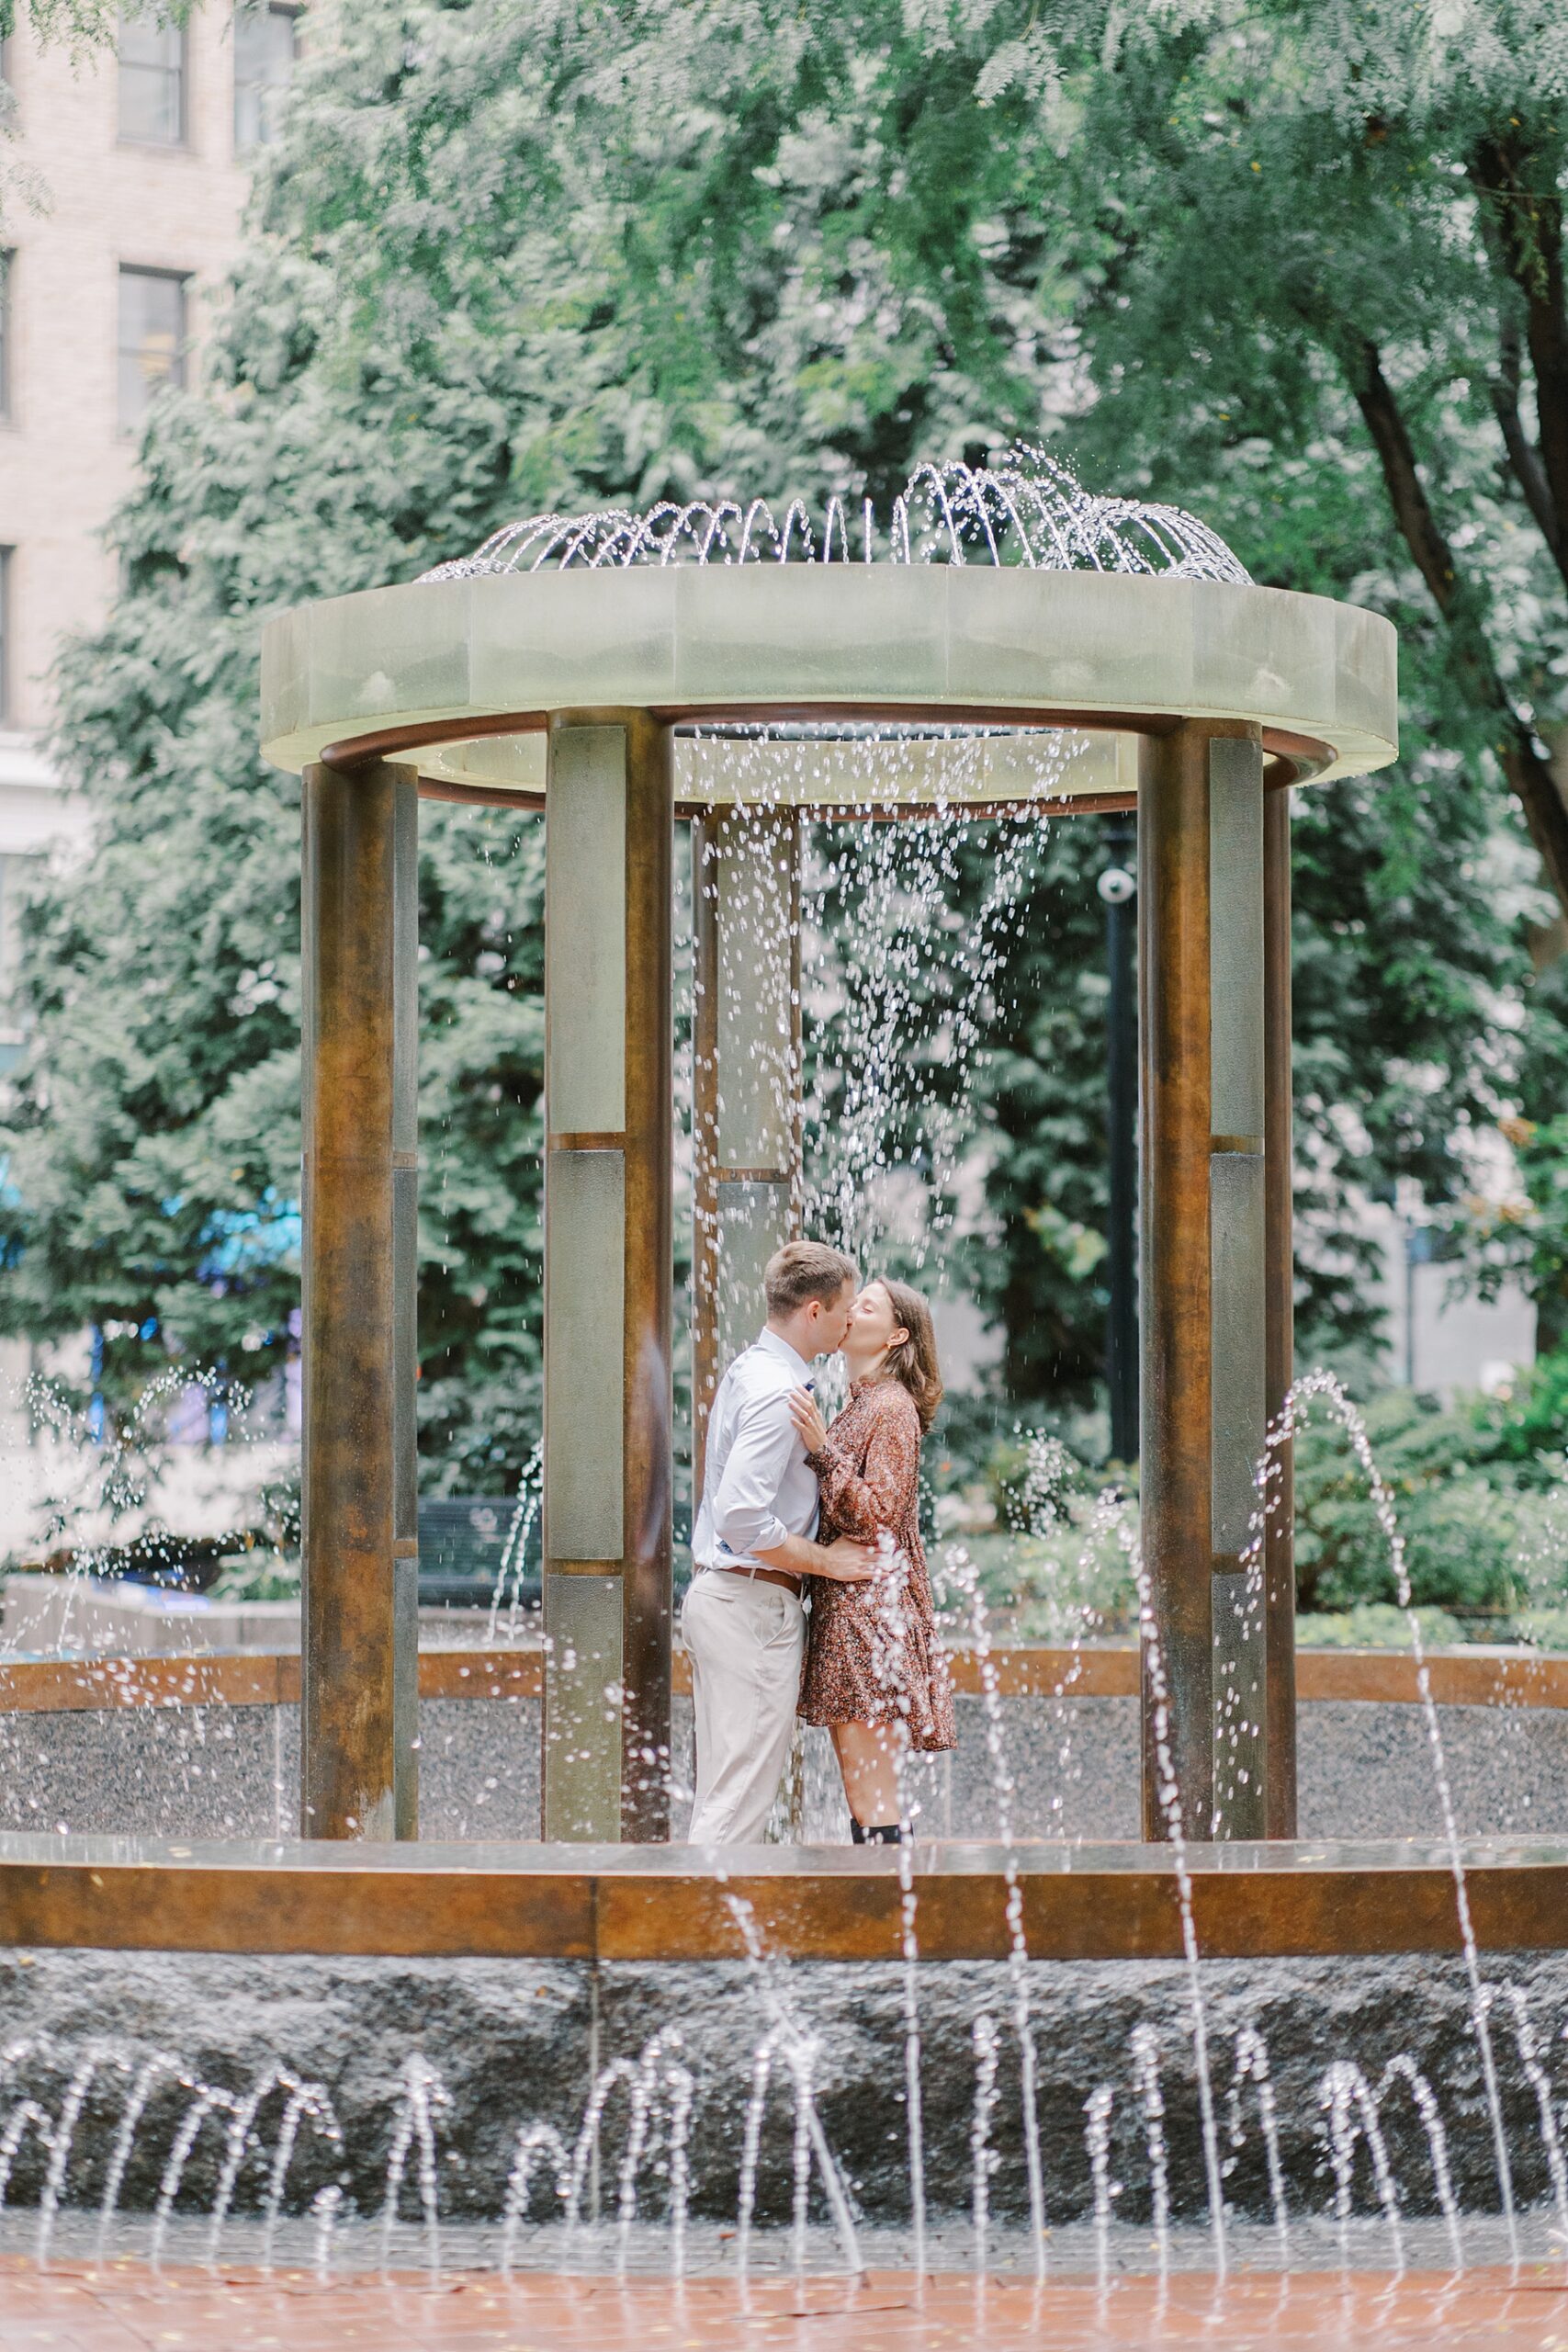 romantic engagement portraits by water fountain in Boston